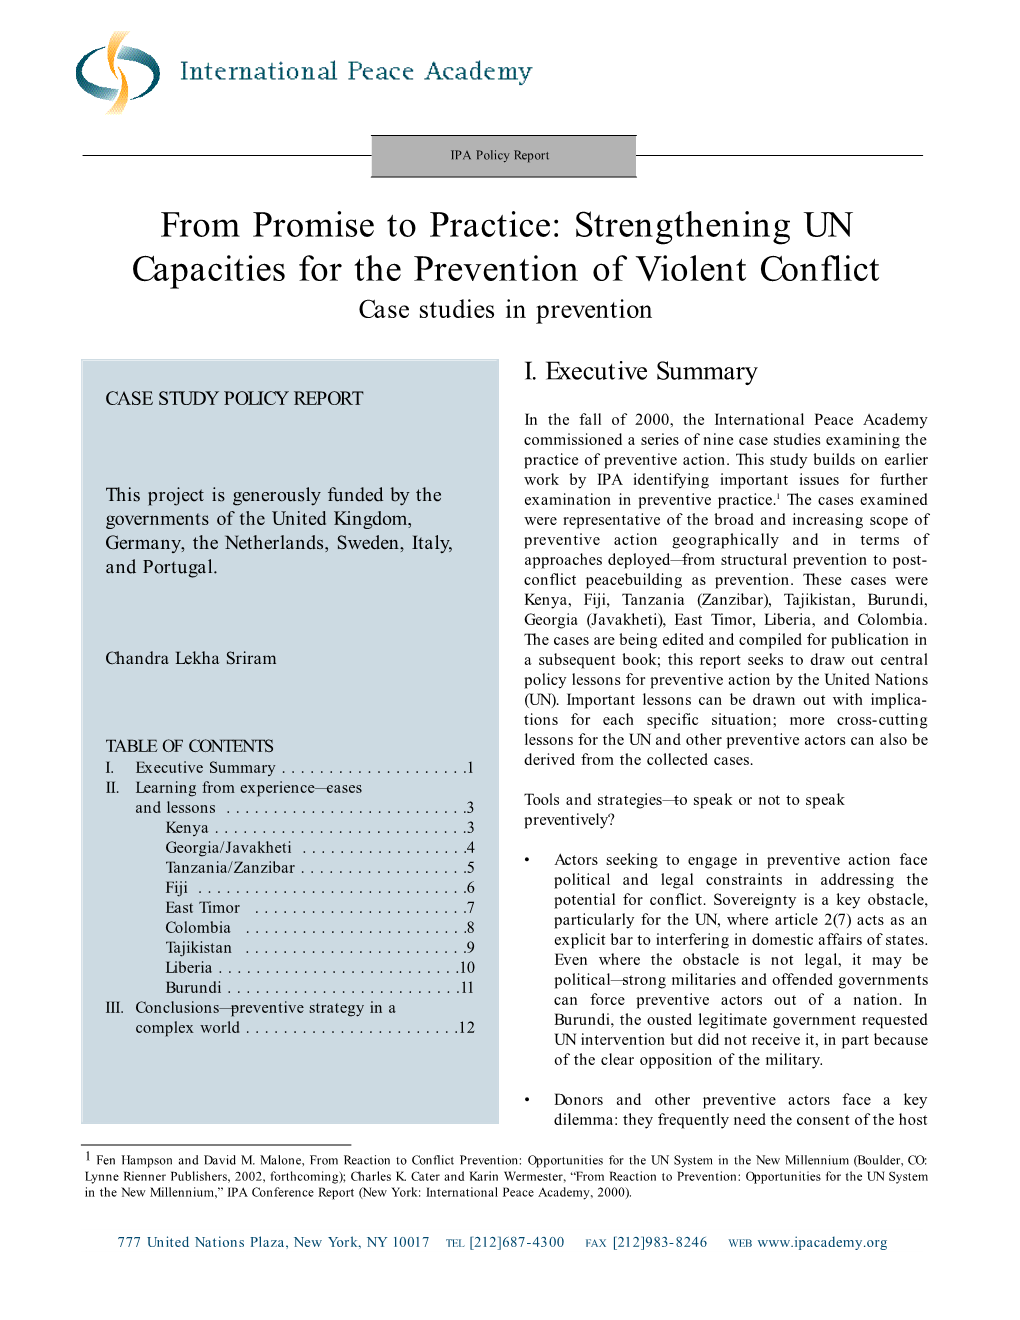 From Promise to Practice: Strengthening UN Capacities for the Prevention of Violent Conflict Case Studies in Prevention